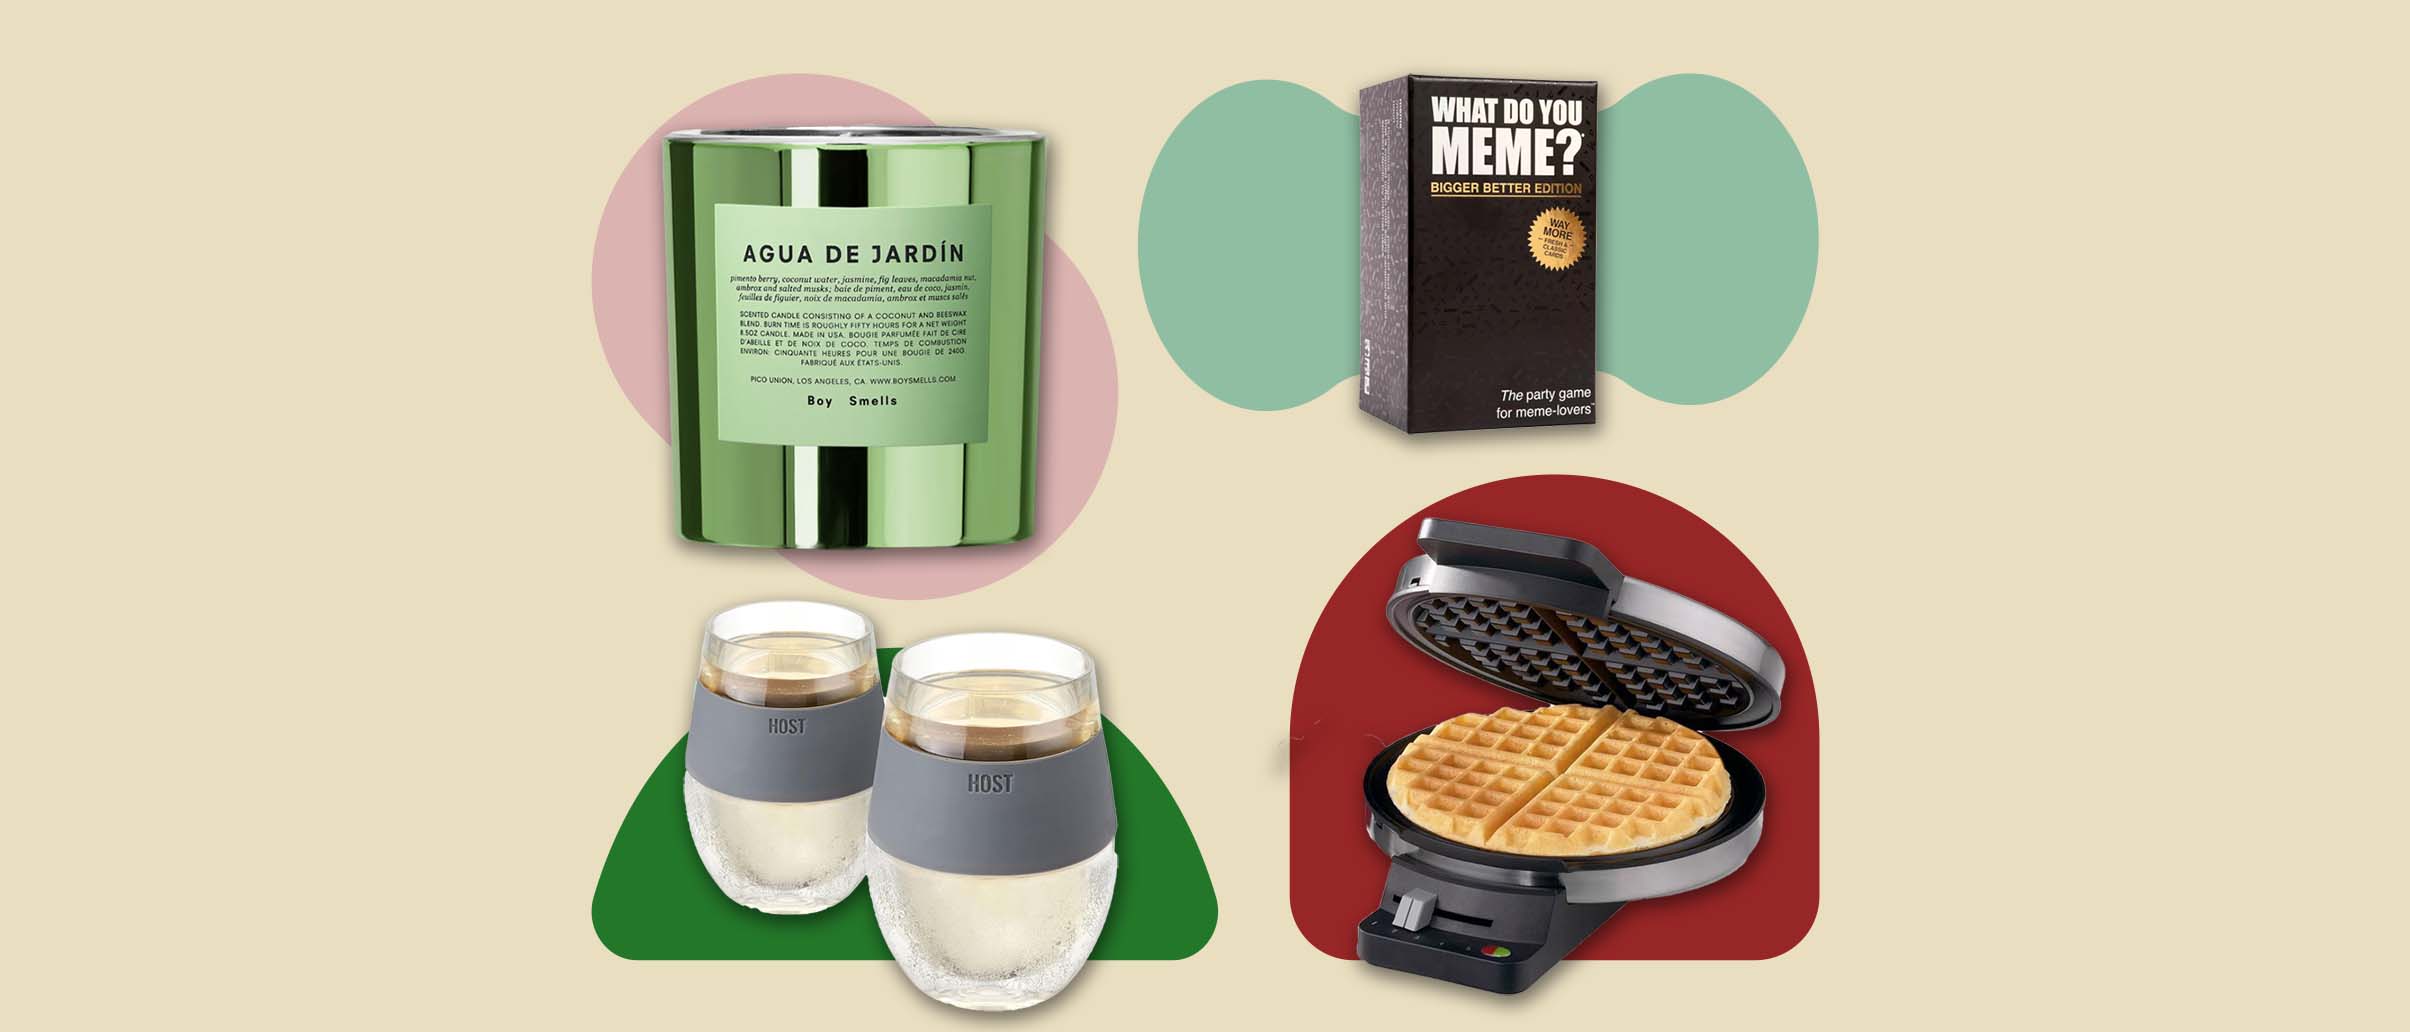 Image of candle, waffle maker, card game and wine glasses